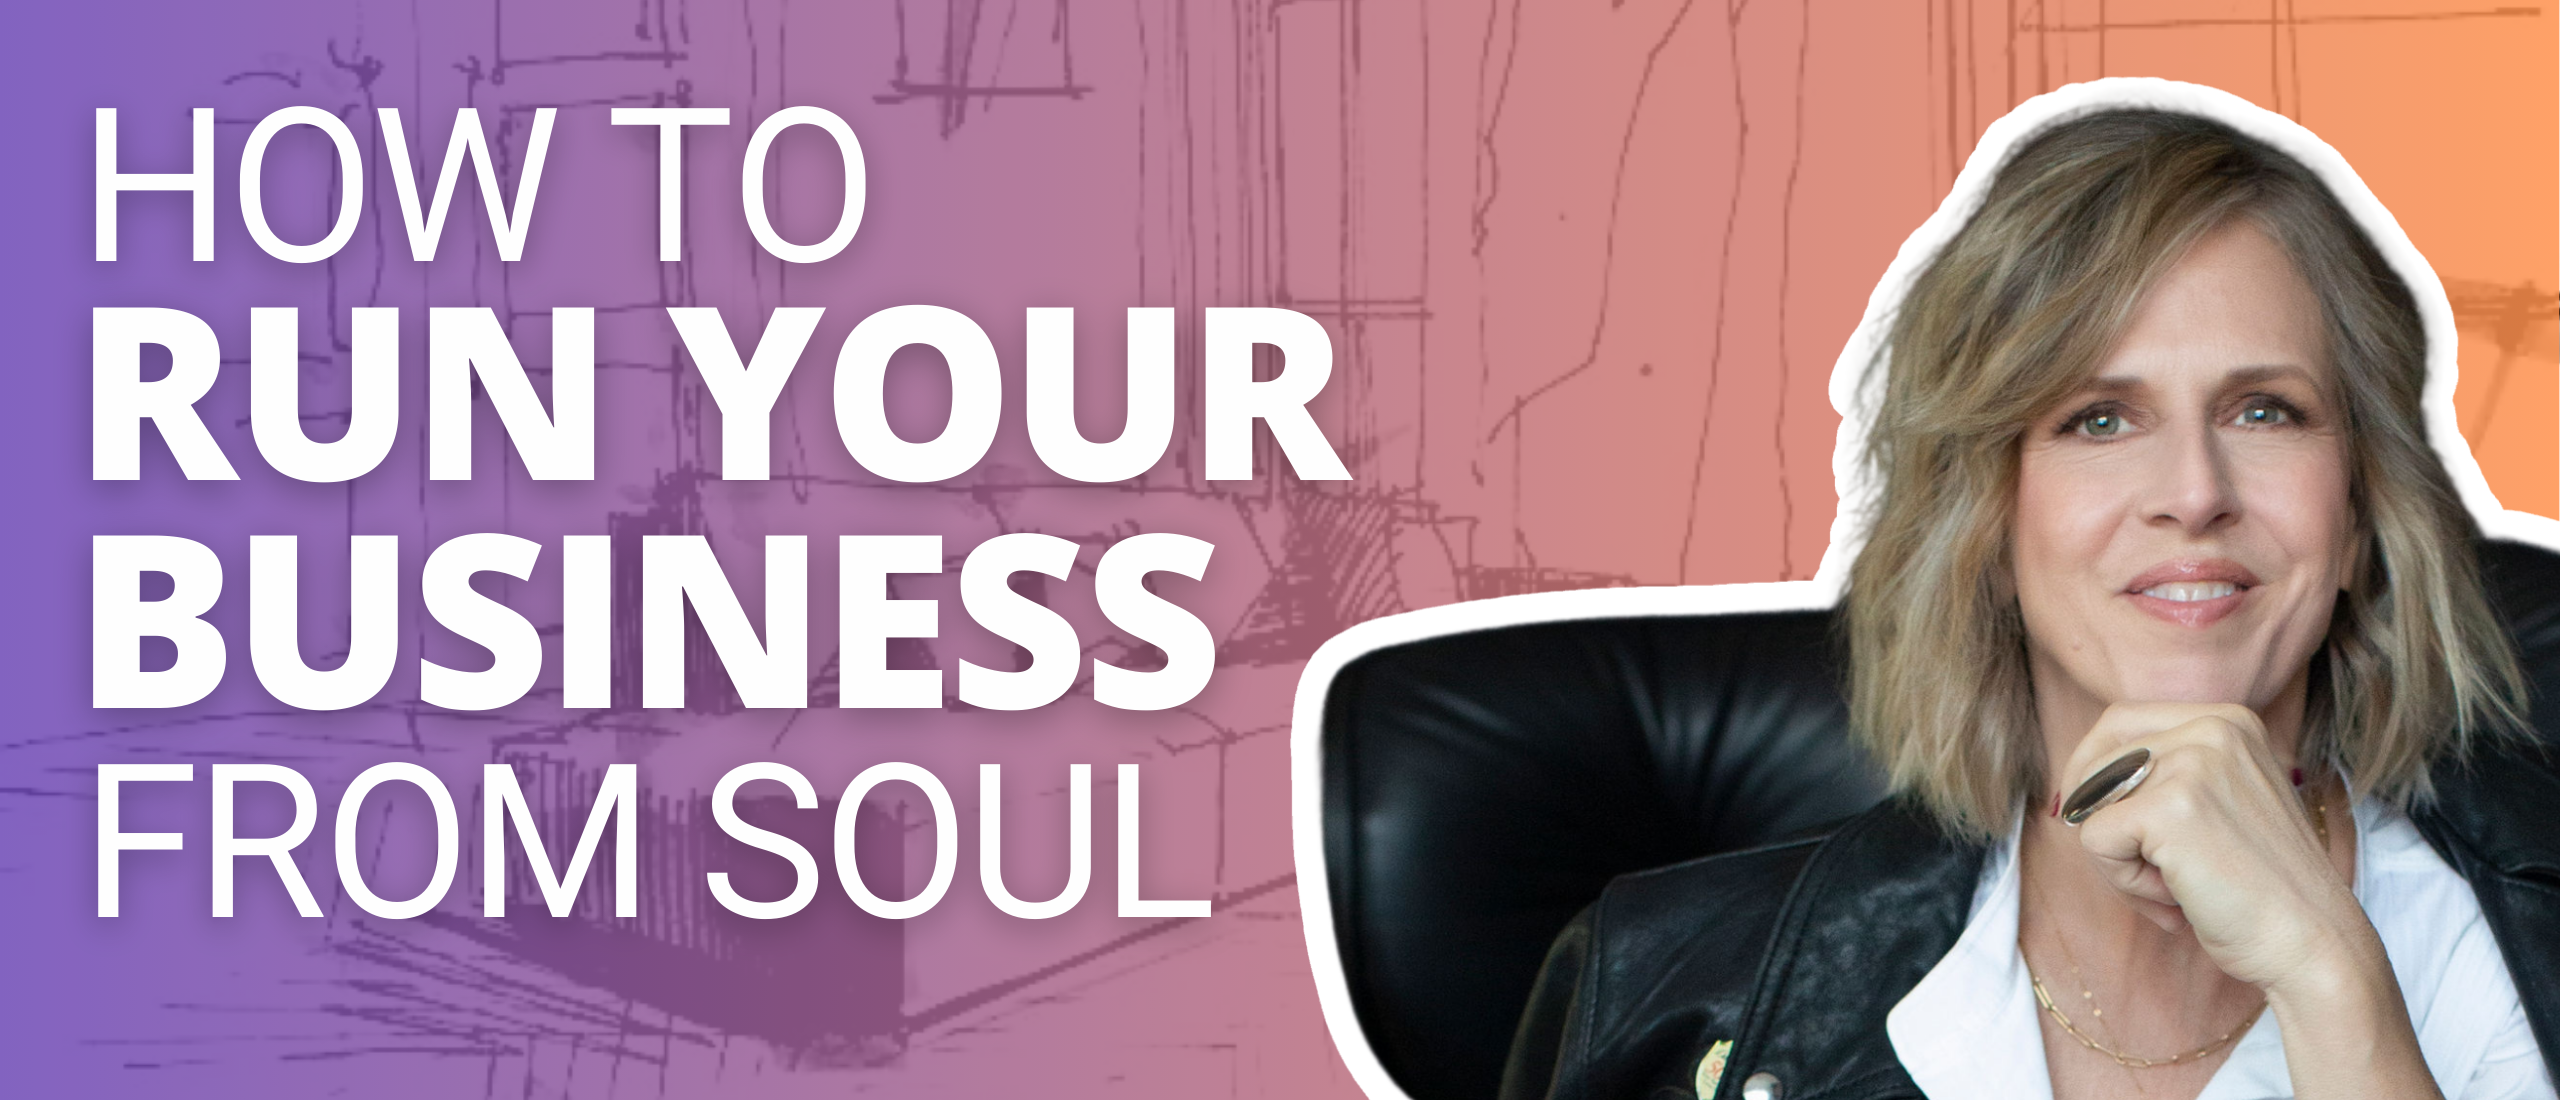 Run your interior design business from soul - with Laura Martin Bovard